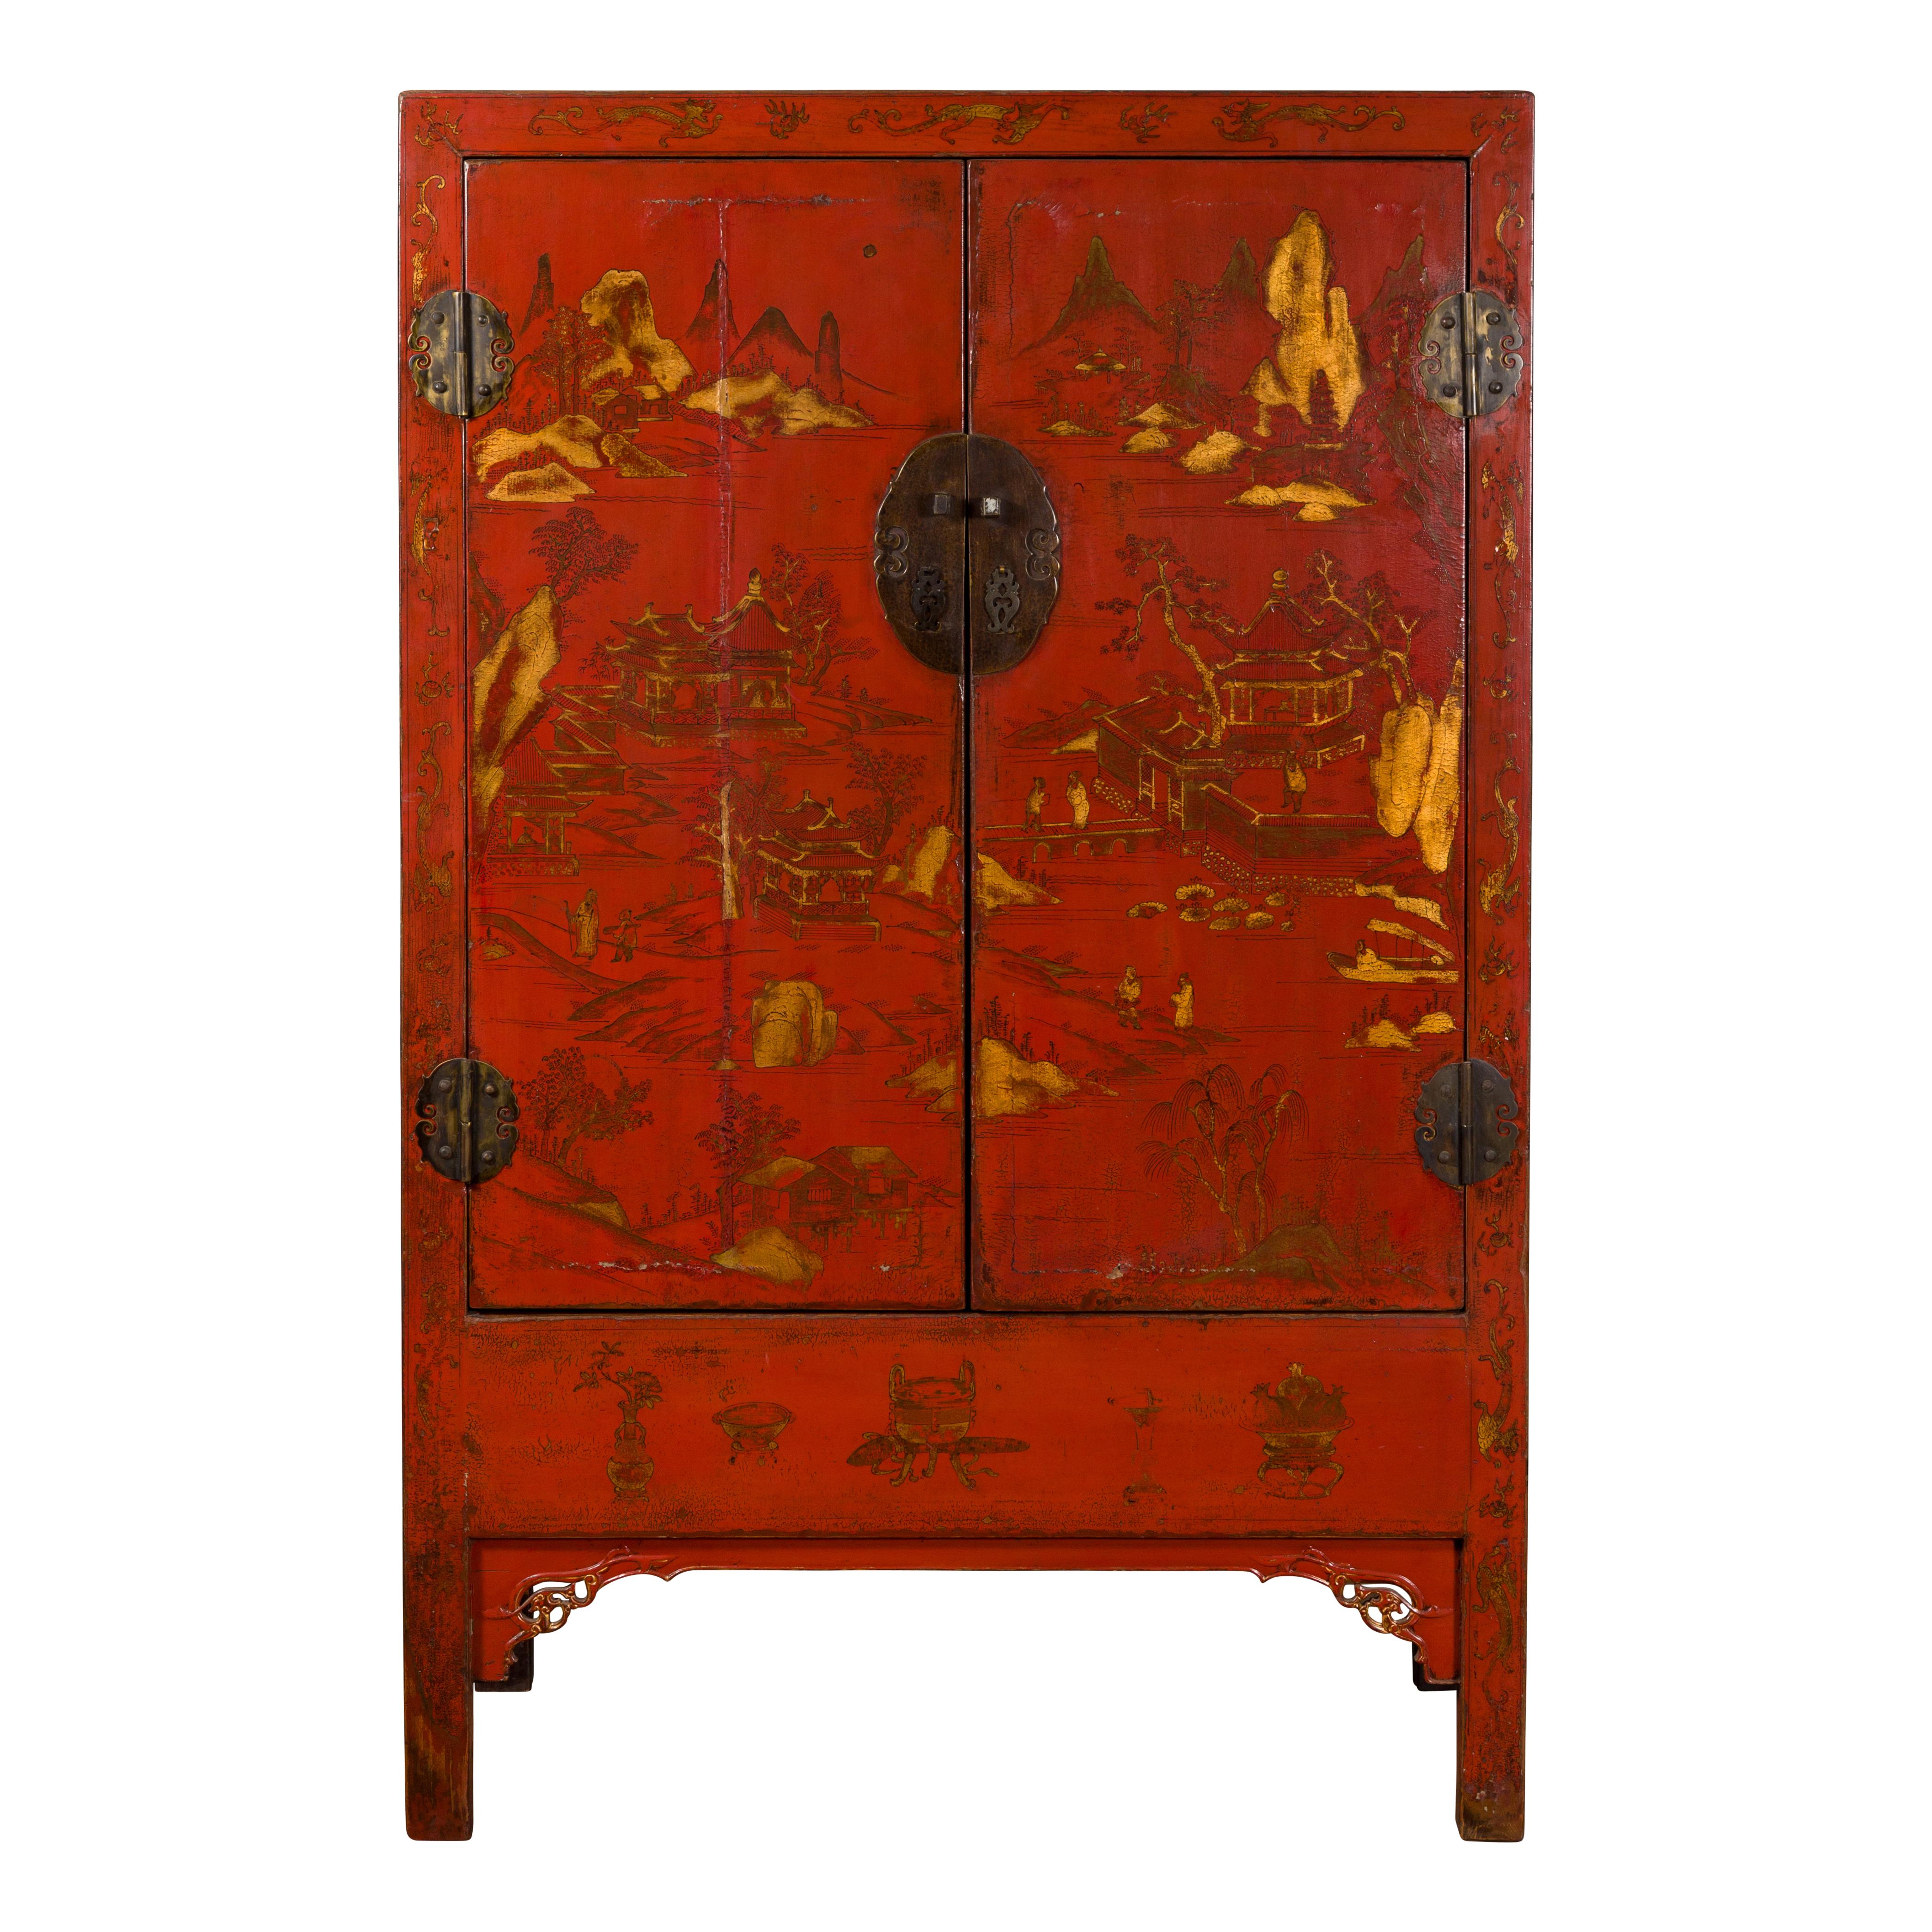 A Chinese Qing Dynasty period original red lacquer cabinet from the 19th century, with gilt Chinoiserie décor. Created in China during the Qing Dynasty, this cabinet features a linear silhouette perfectly accented by a red lacquered ground